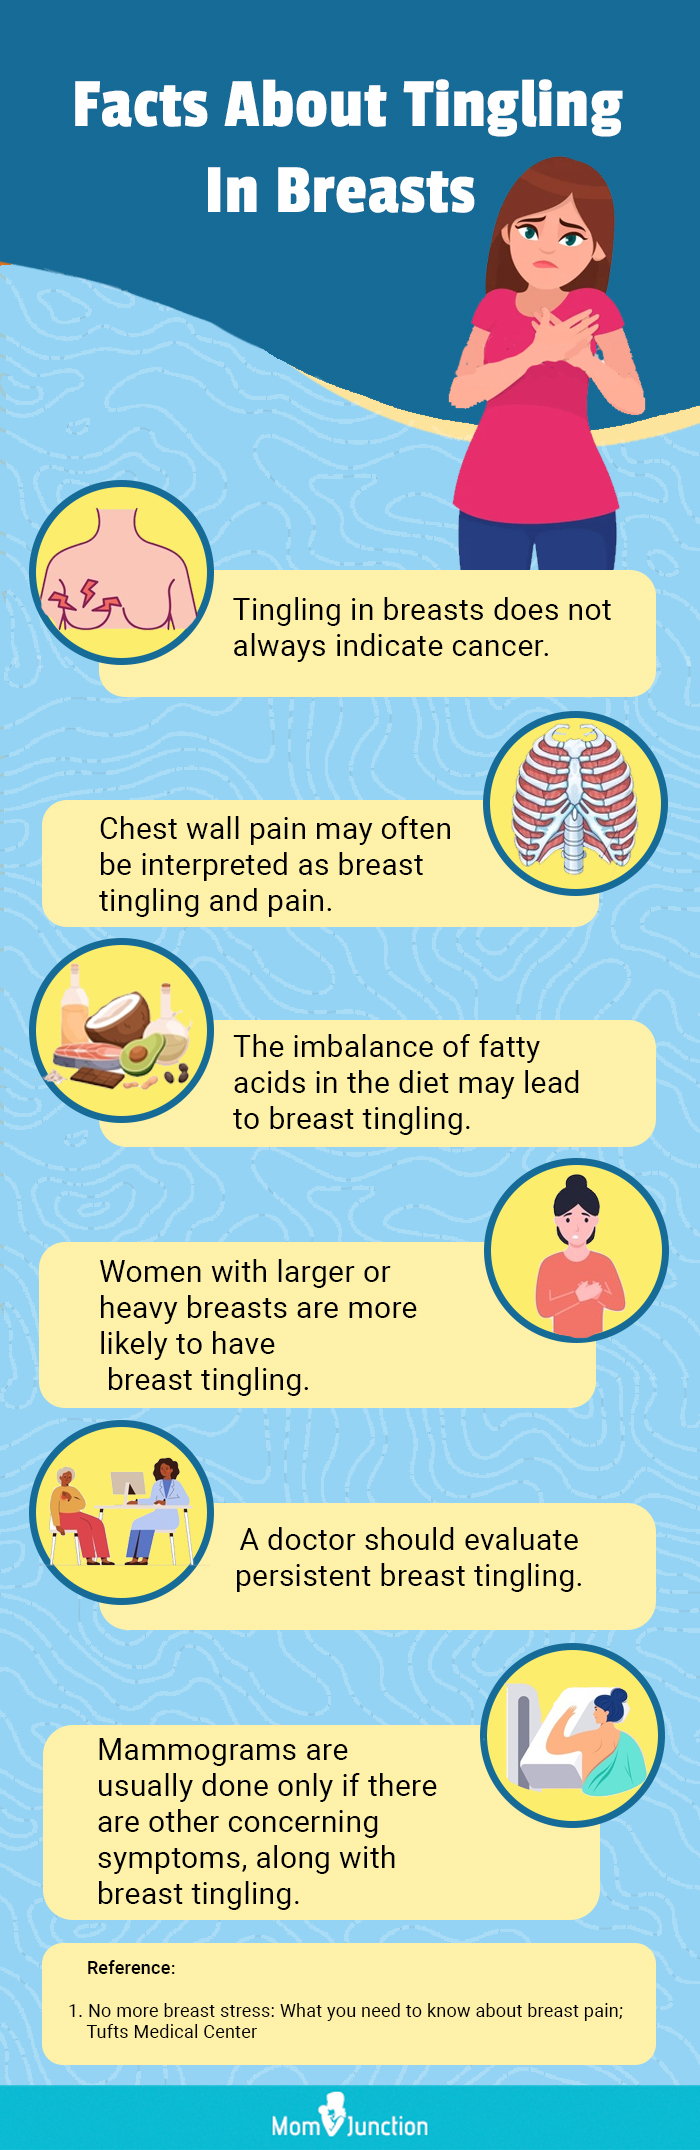 10 Signs of Breast Cancer to Bring to Your Doc's Attention